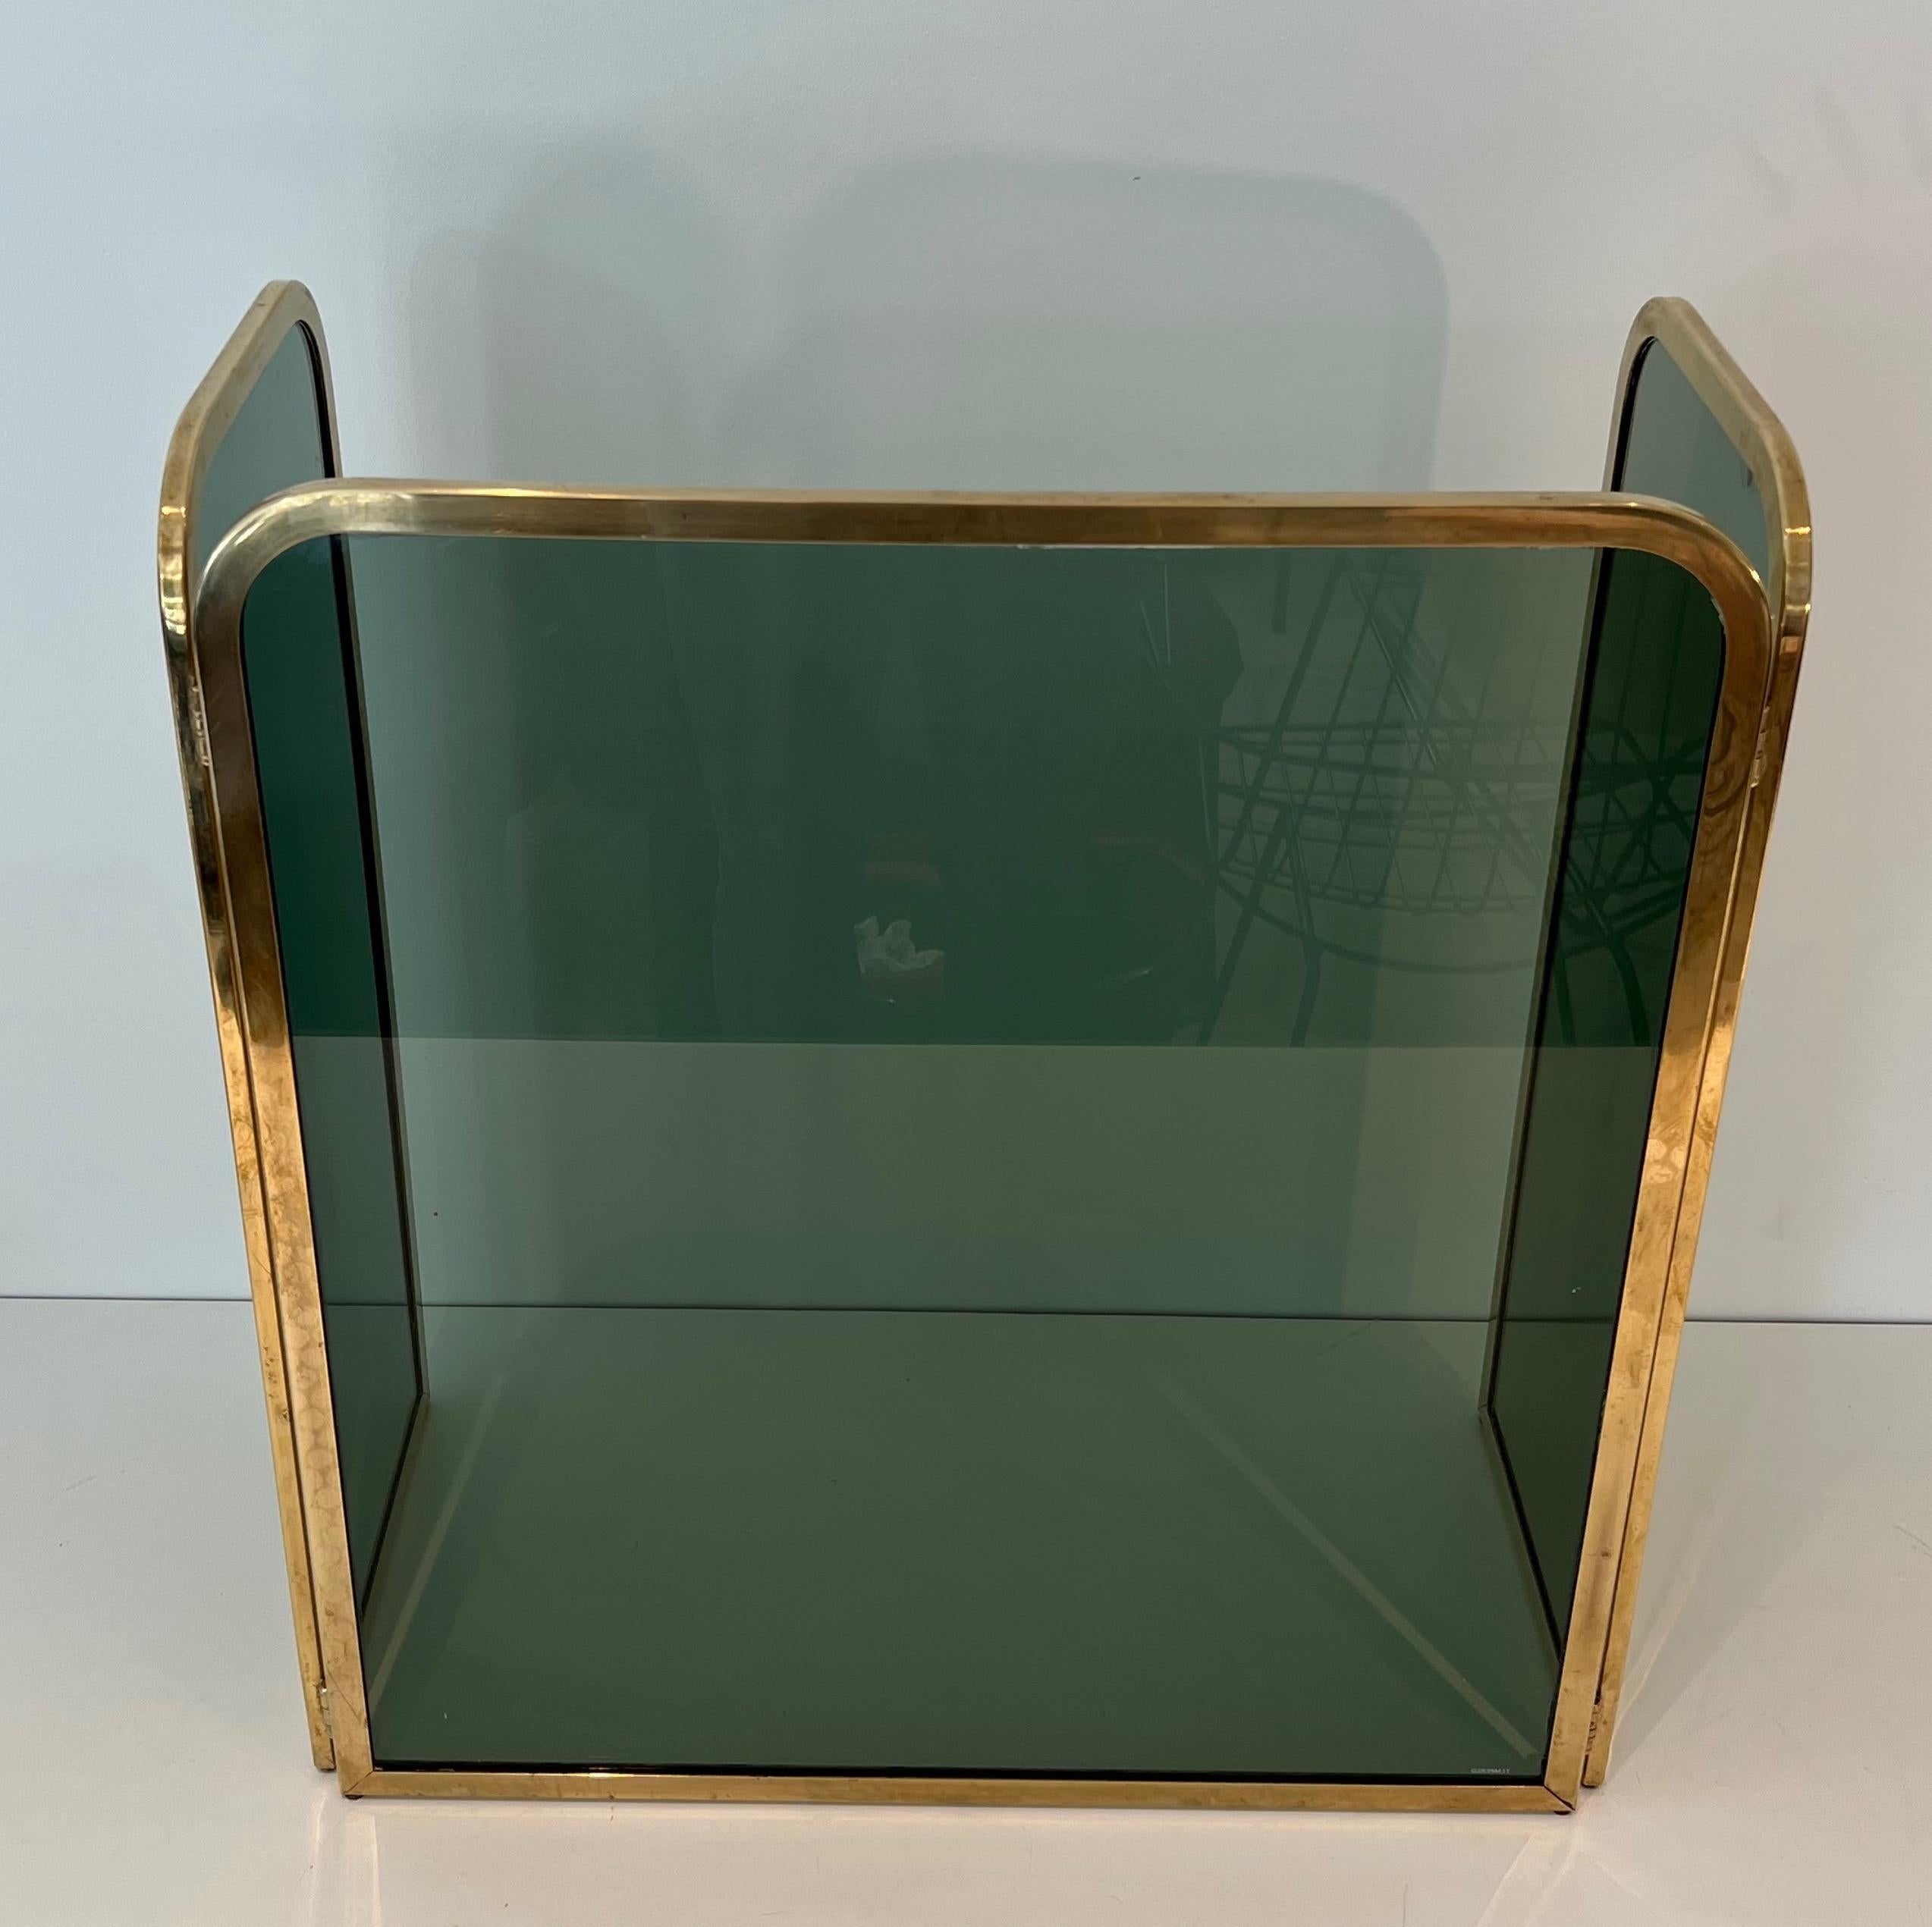 This nice and unusual fireplace screen is made of 3 greenish tempered glass panels, each panel surrounded by a brass Frame. This is a French work. Circa 1970